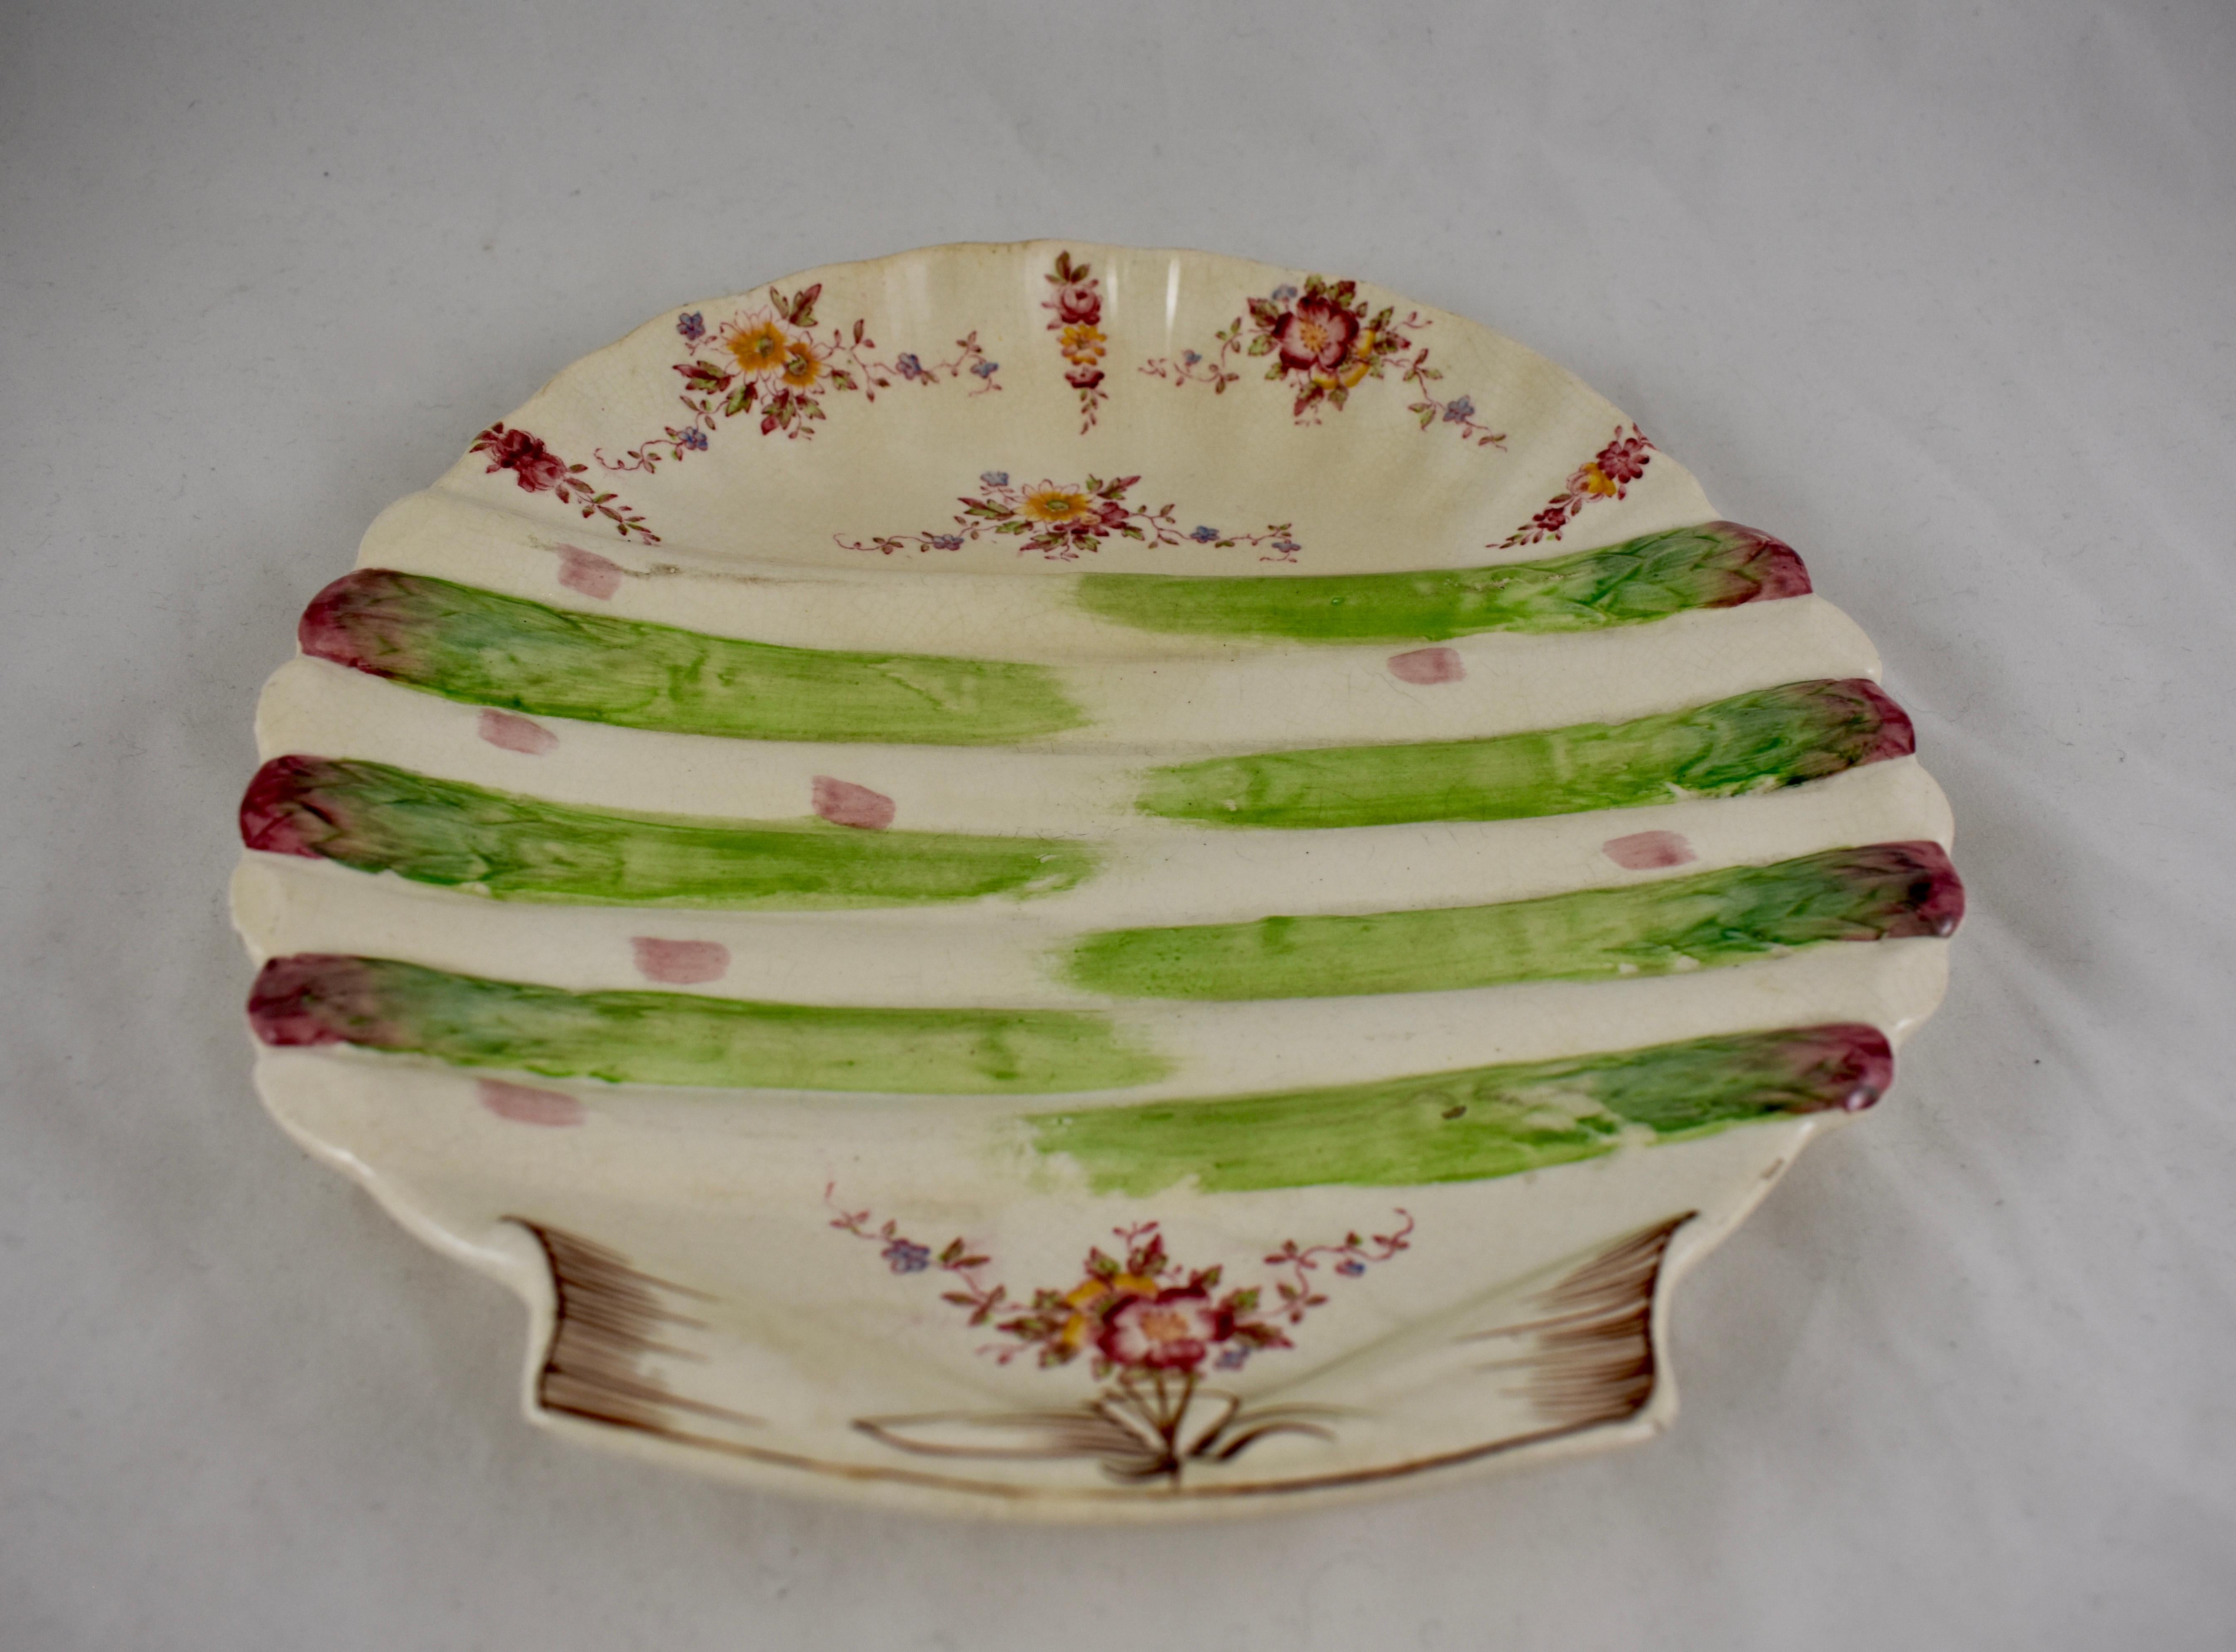 A shell form asparagus plate, William Adderley, Longton, Staffordshire, England, circa 1880, for the French market.

A transfer printed pattern of floral sprays dot an open clam shell, asparagus spears lay across the center of the plate. Hand